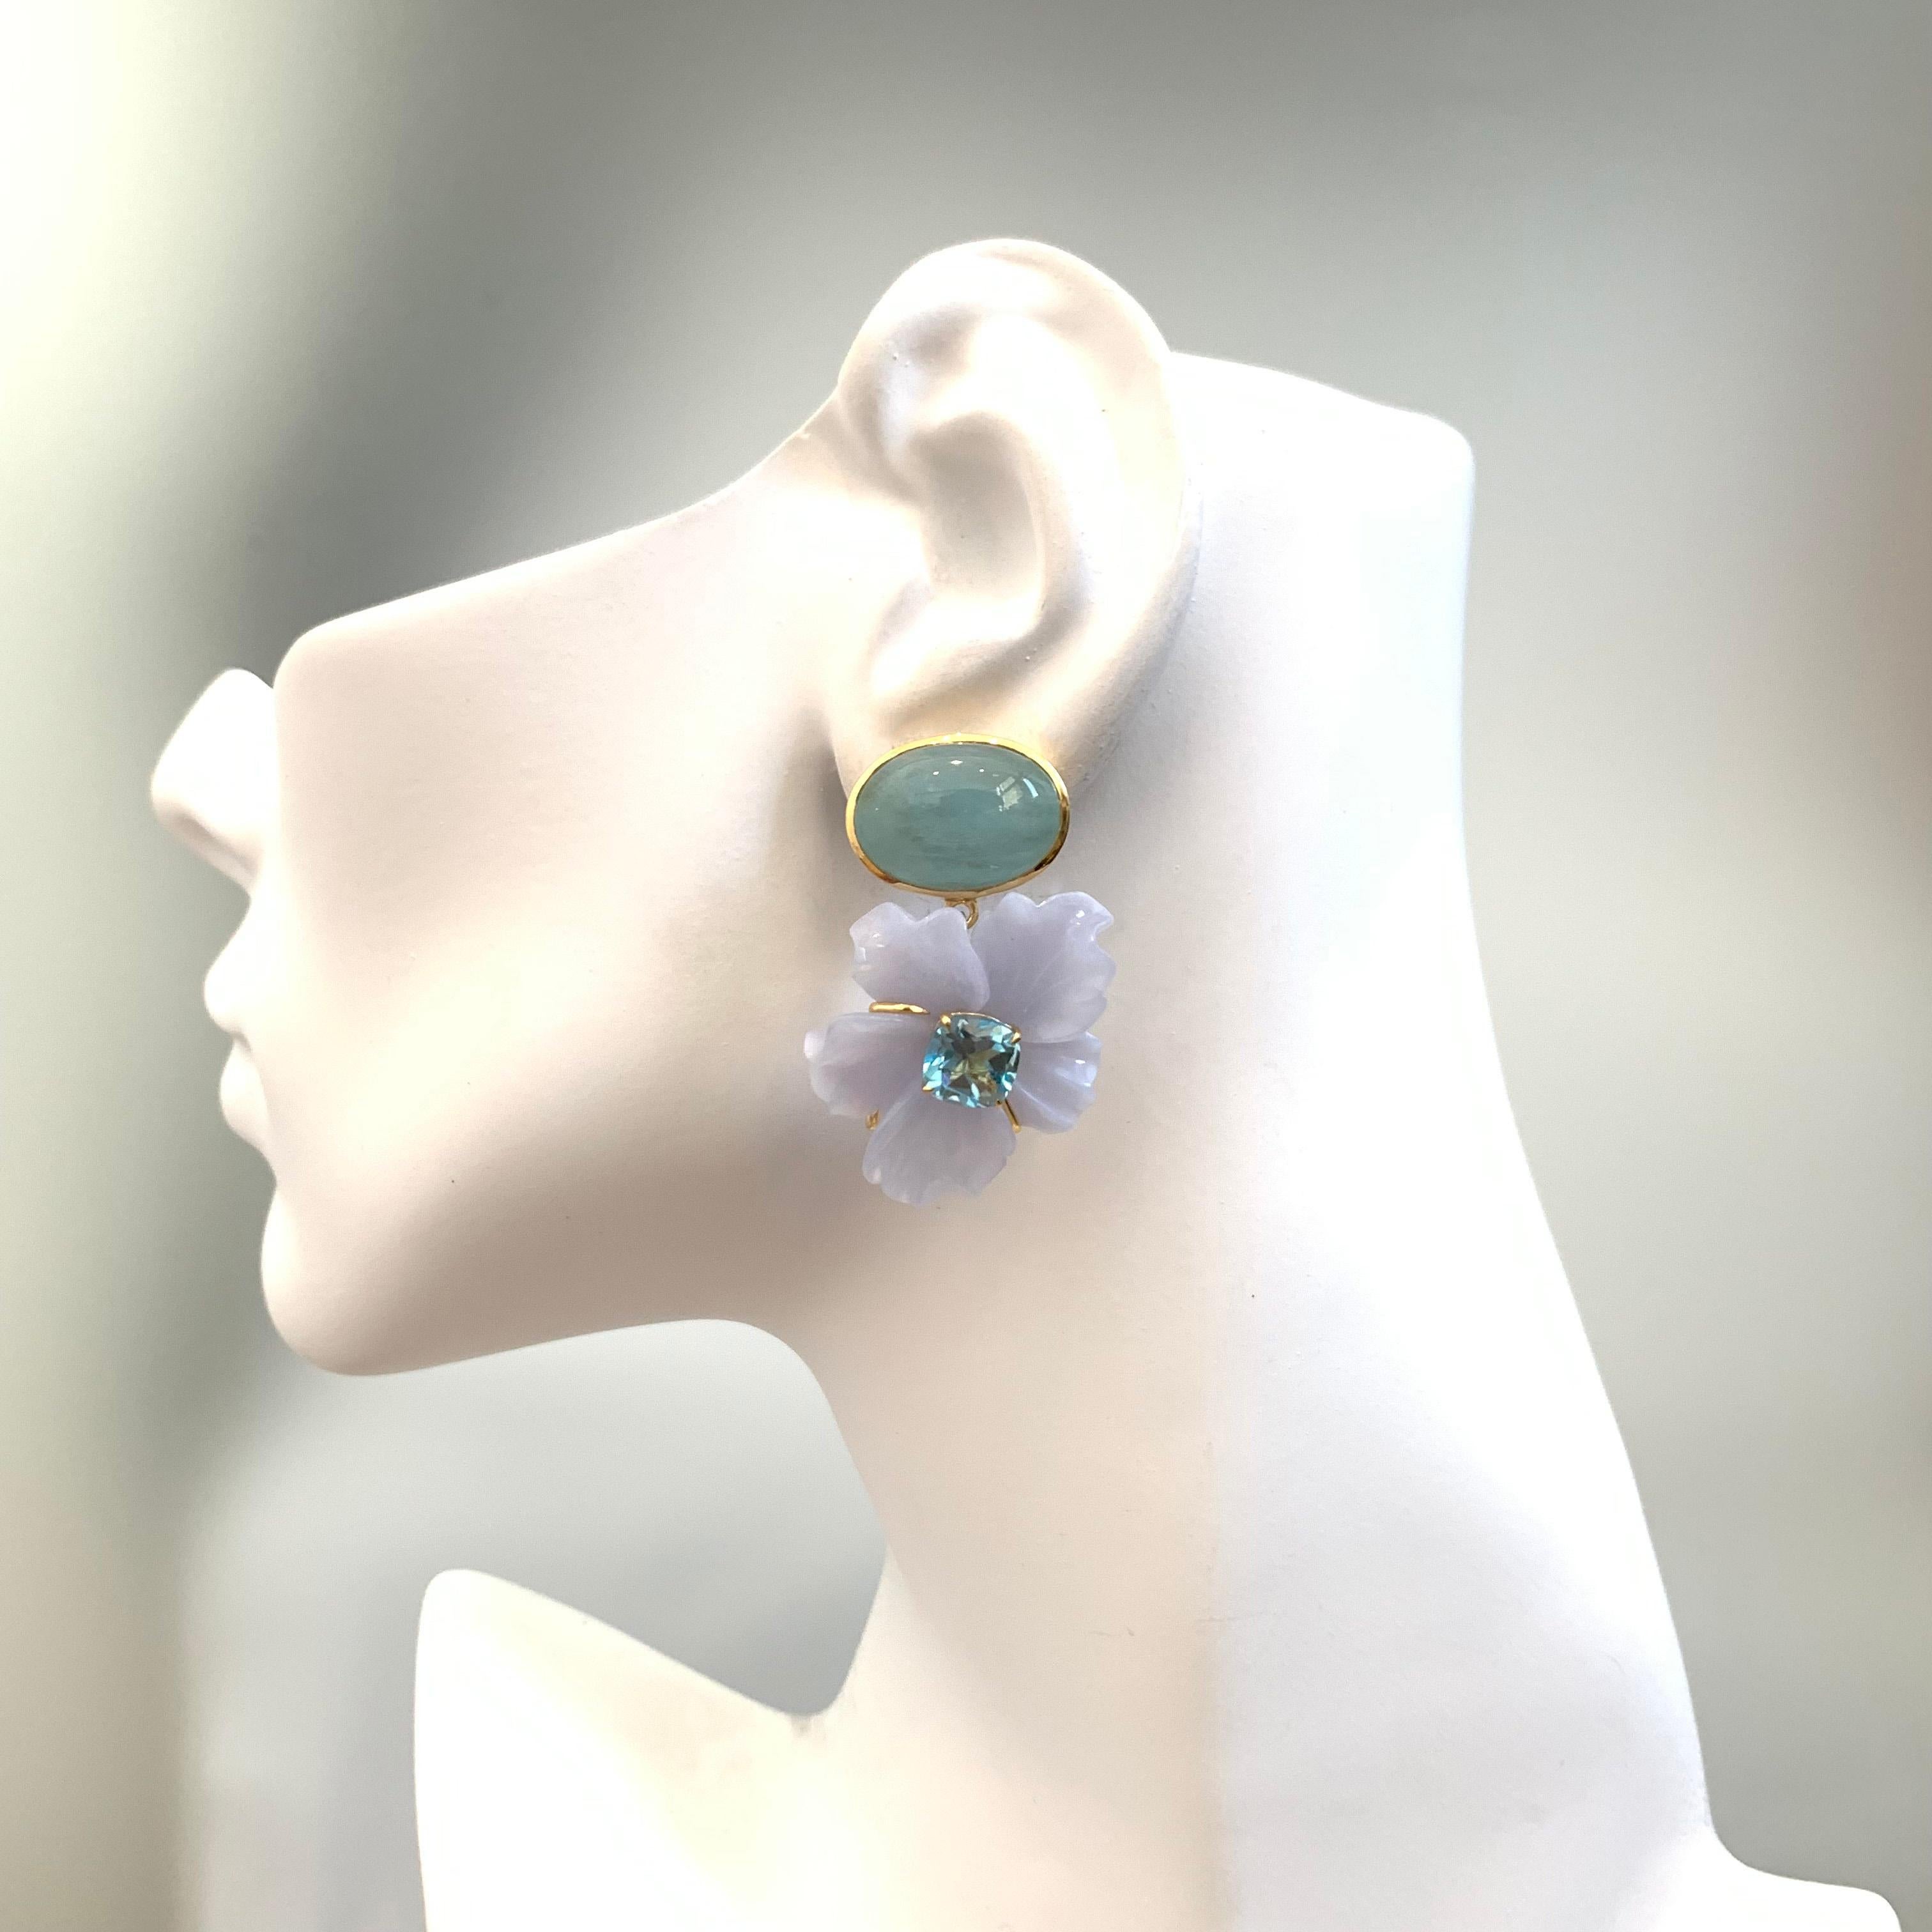 Women's Stunning Cabochon Aquamarine and Carved Chalcedony Flower Drop Earrings